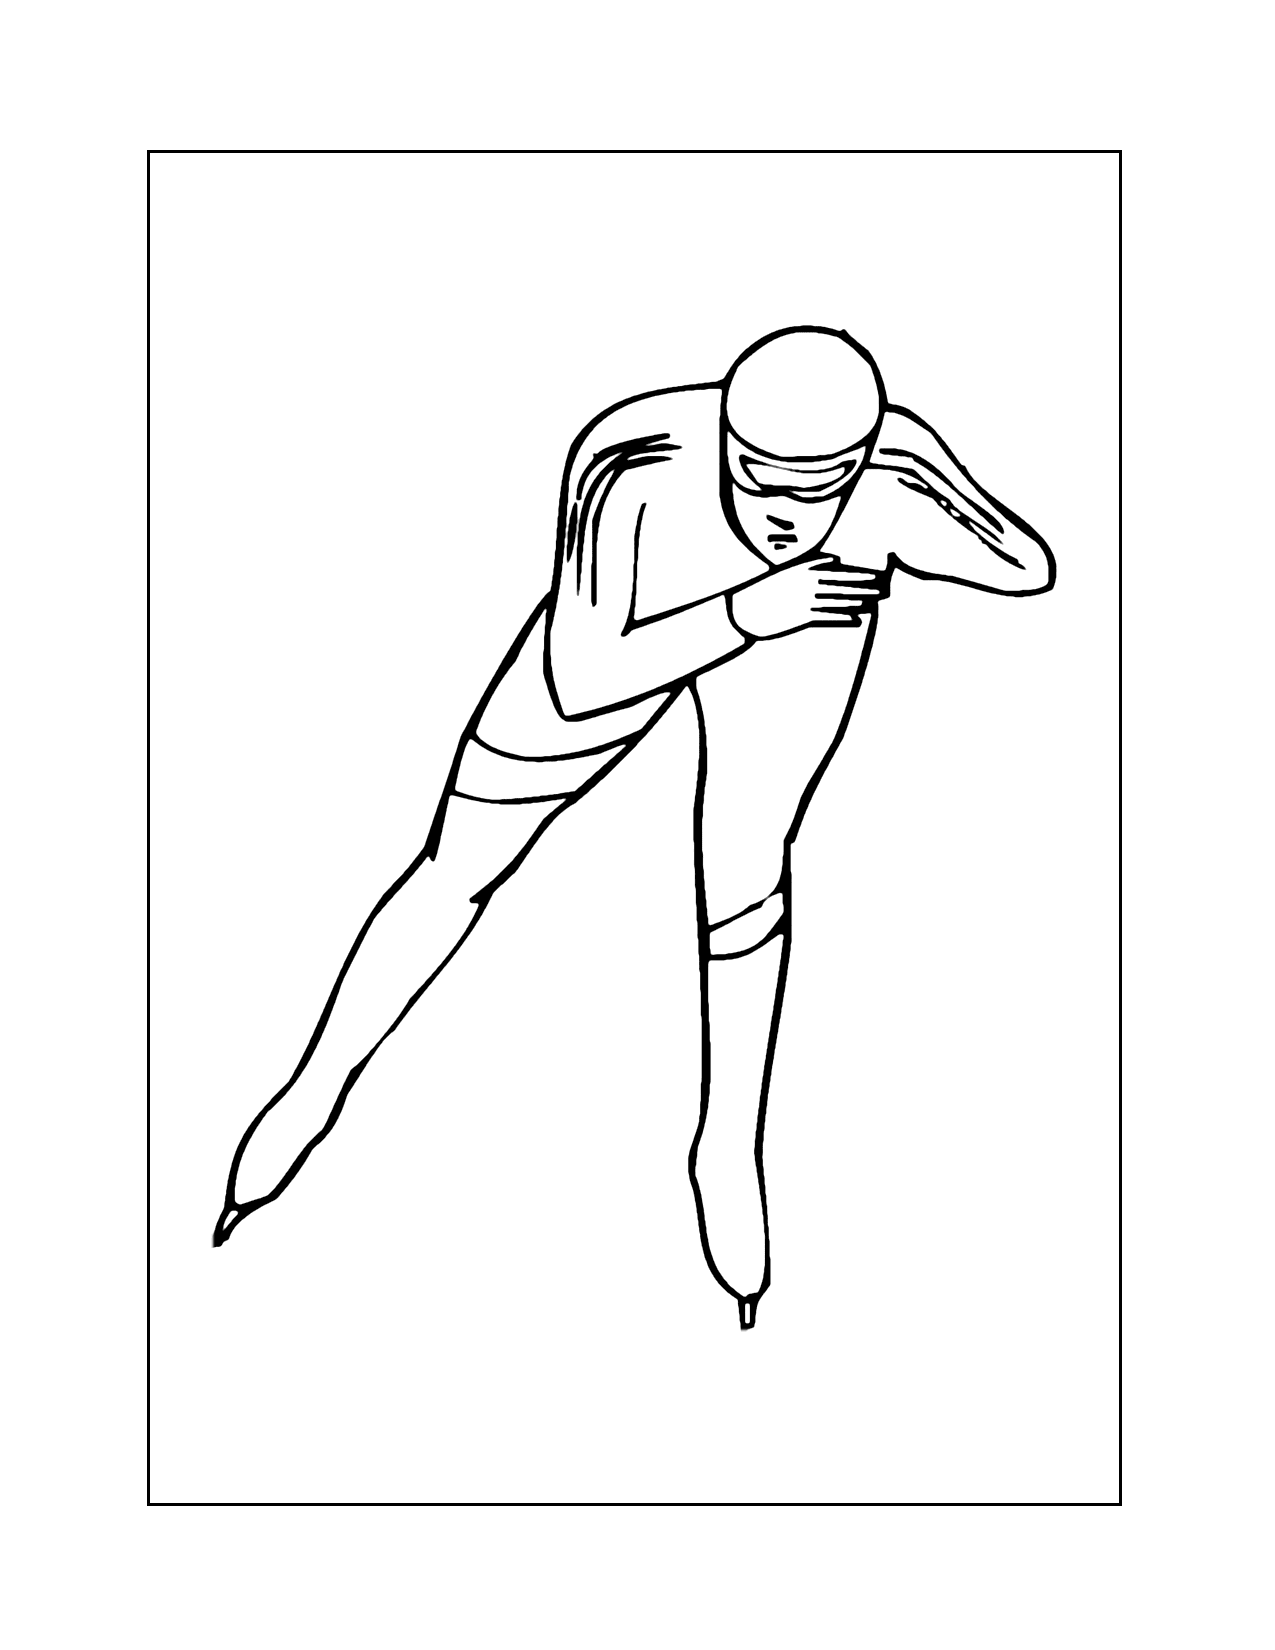 Speed Ice Skater Coloring Page